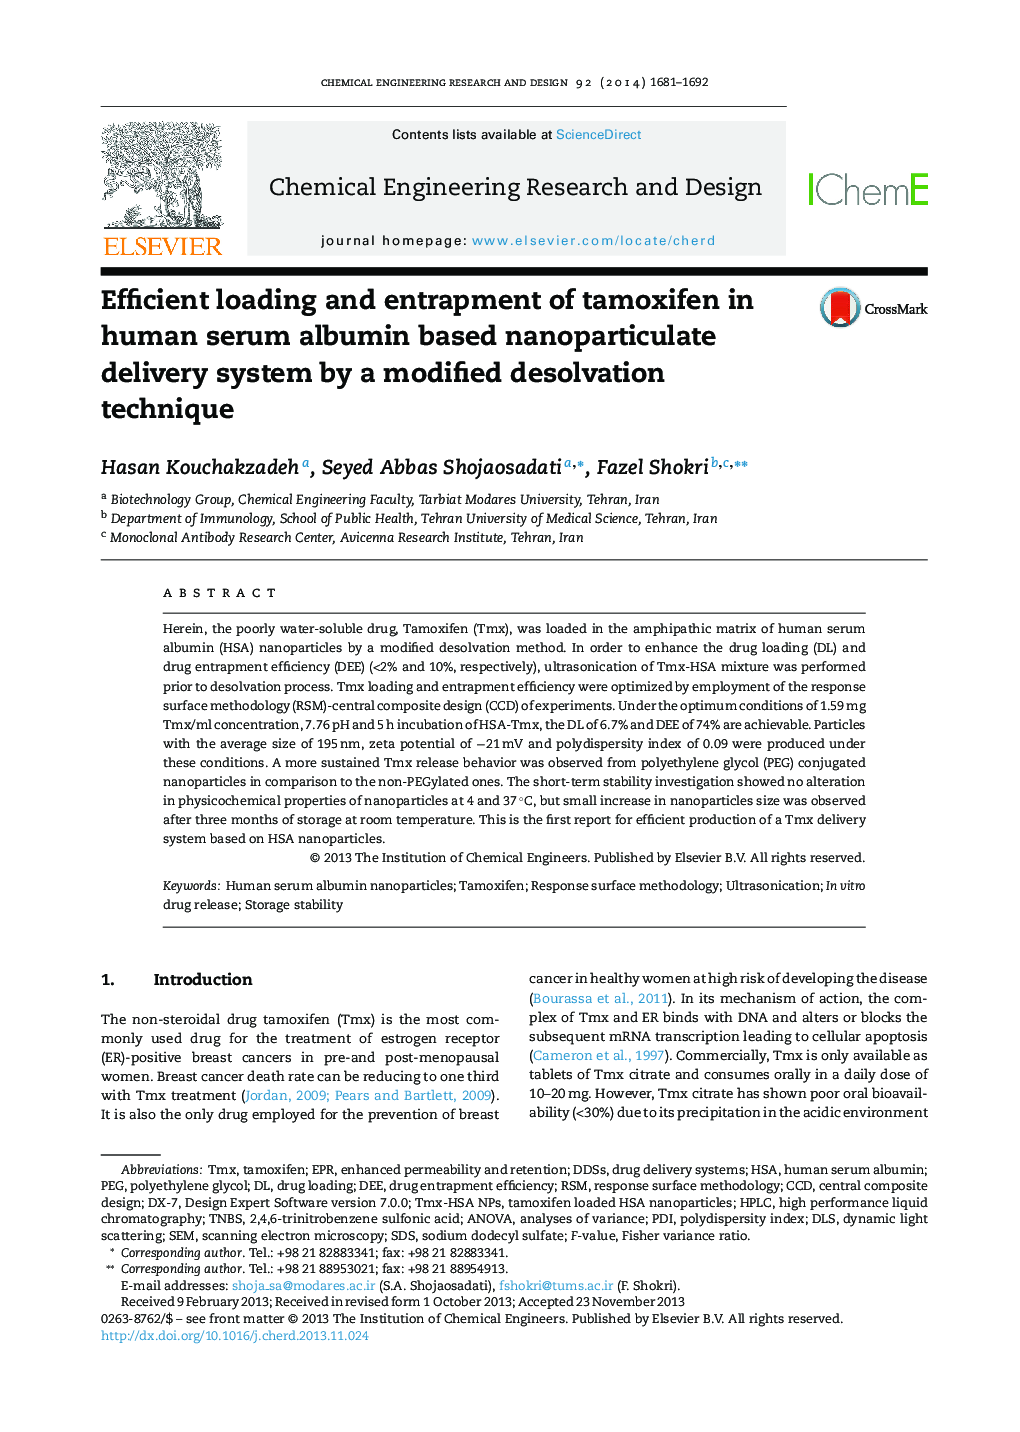 Efficient loading and entrapment of tamoxifen in human serum albumin based nanoparticulate delivery system by a modified desolvation technique